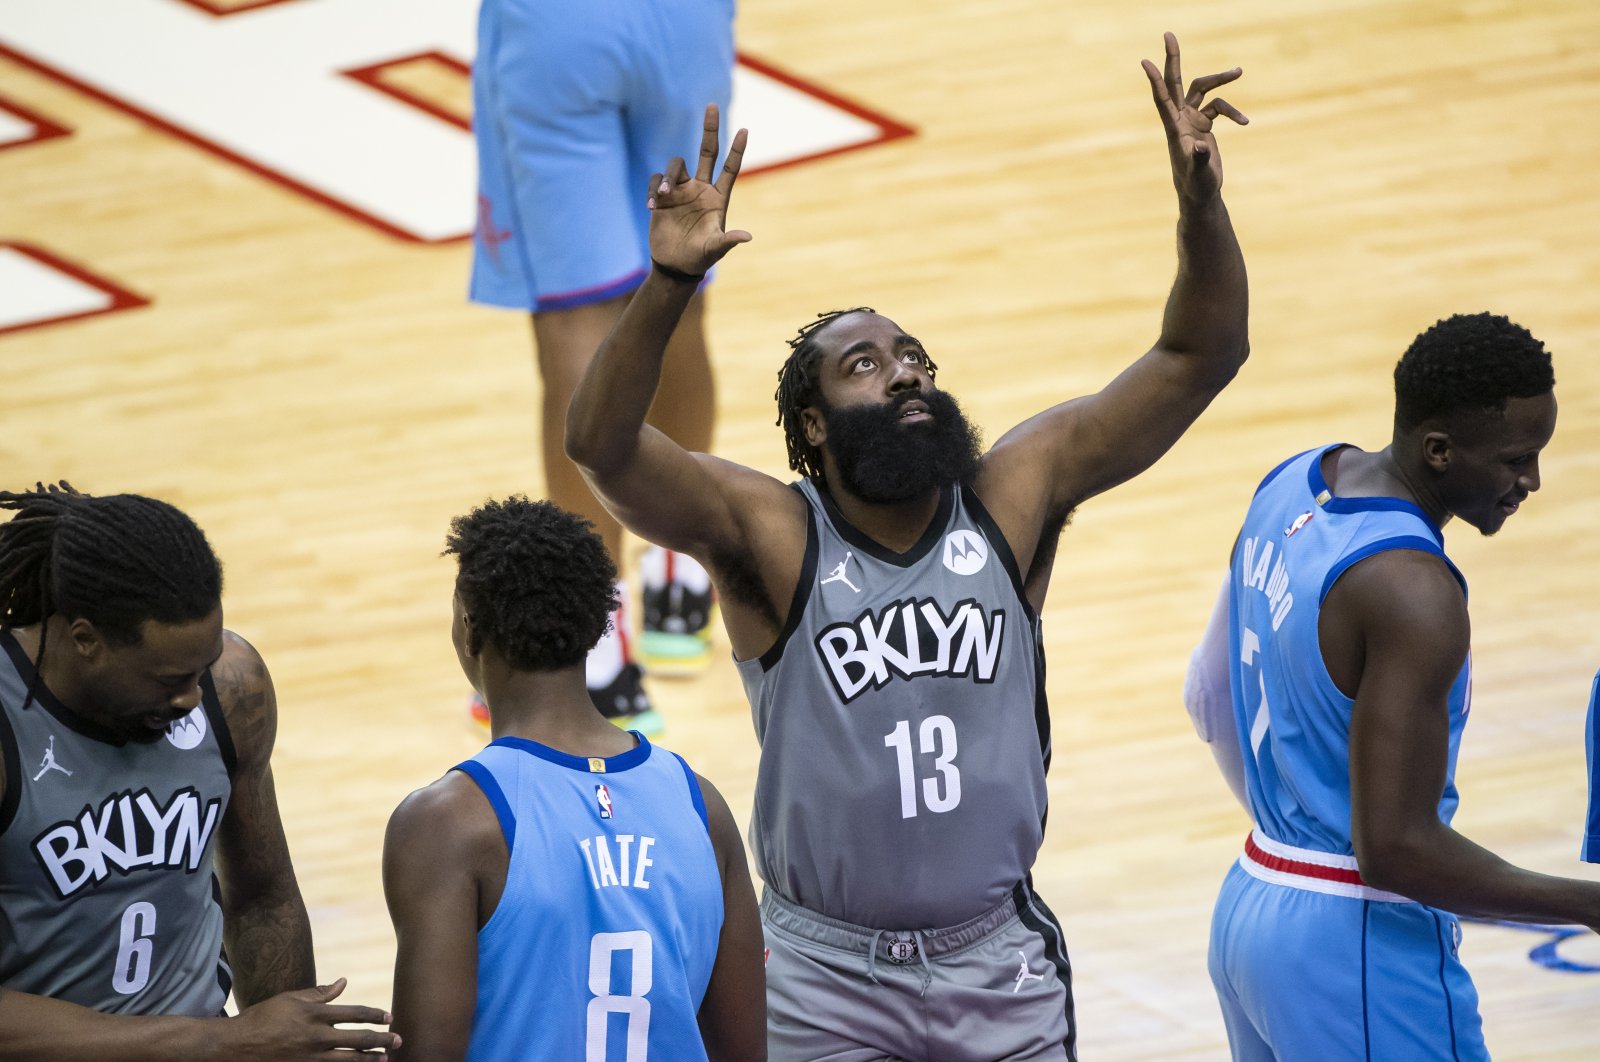 Brooklyn Nets guard James Harden (C) prepares to start in an NBA game against the Houston Rockets, in Houston, Texas, March 3, 2021. (AP Photo)